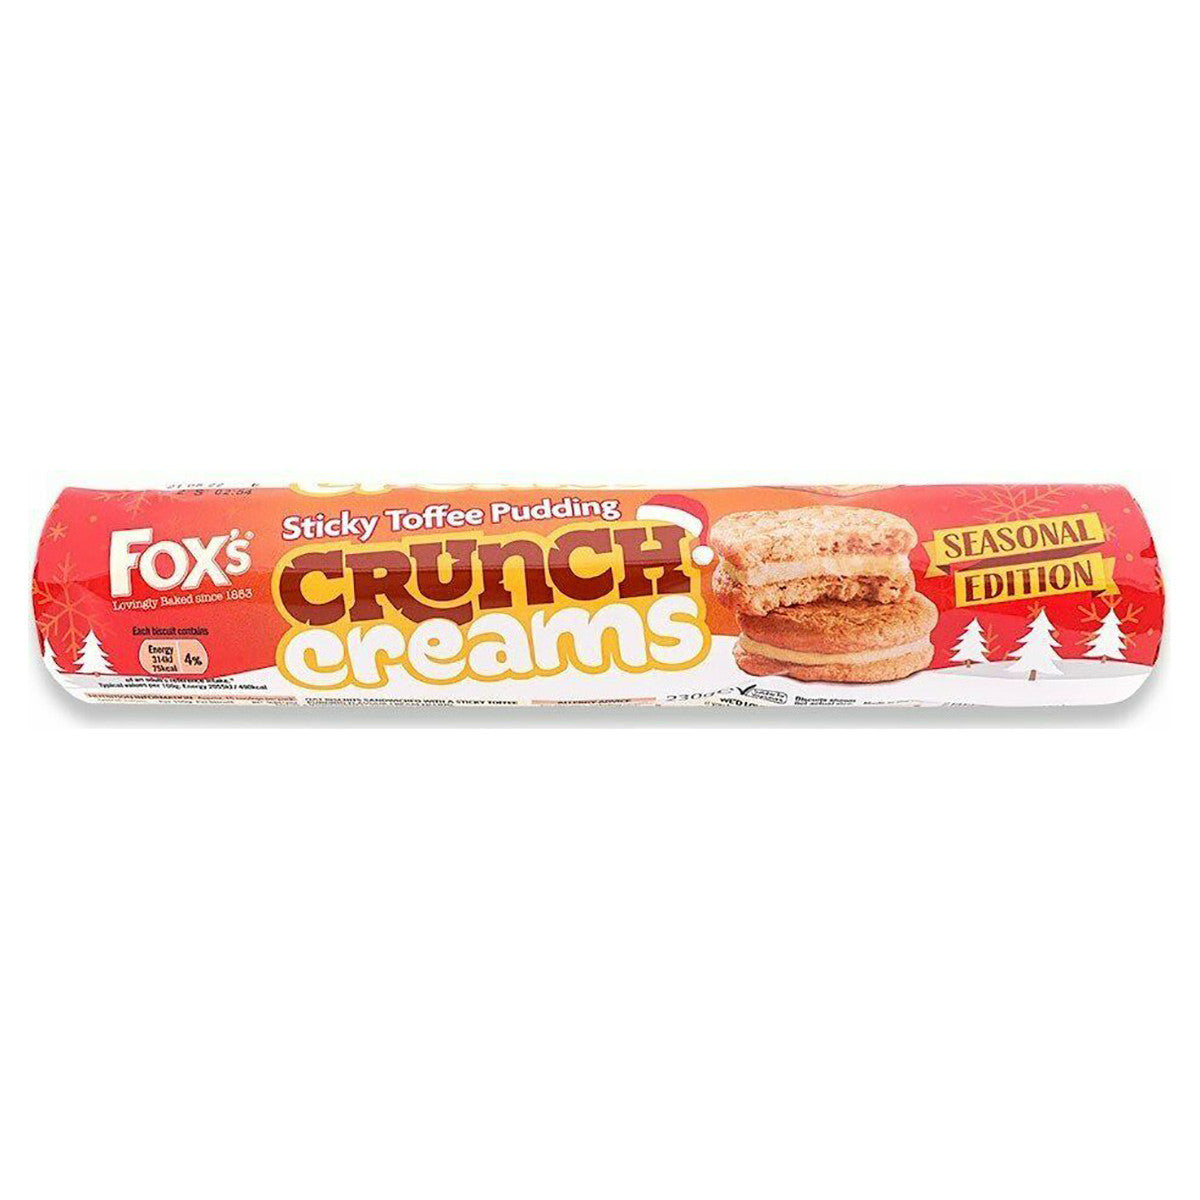 Fox's Crunch Creams Sticky Toffee Pudding Biscuits 7.05oz